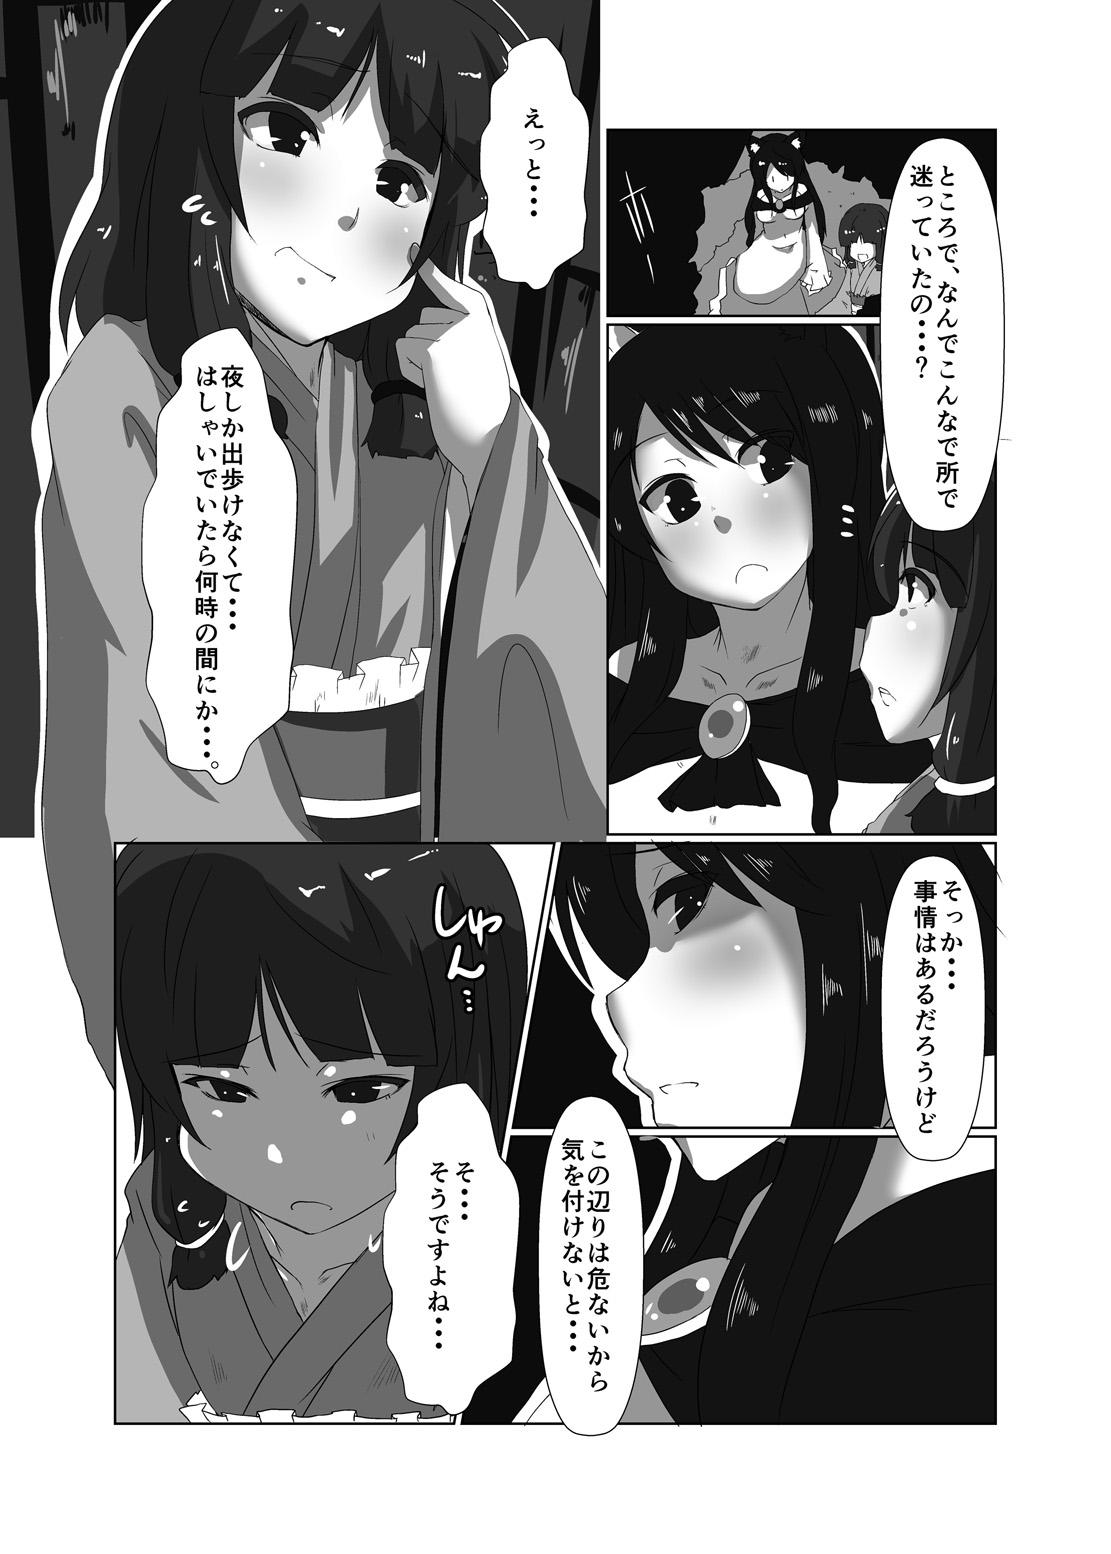 Lolicon ELonely Wolf no Onee-san - Touhou project Collar - Page 9